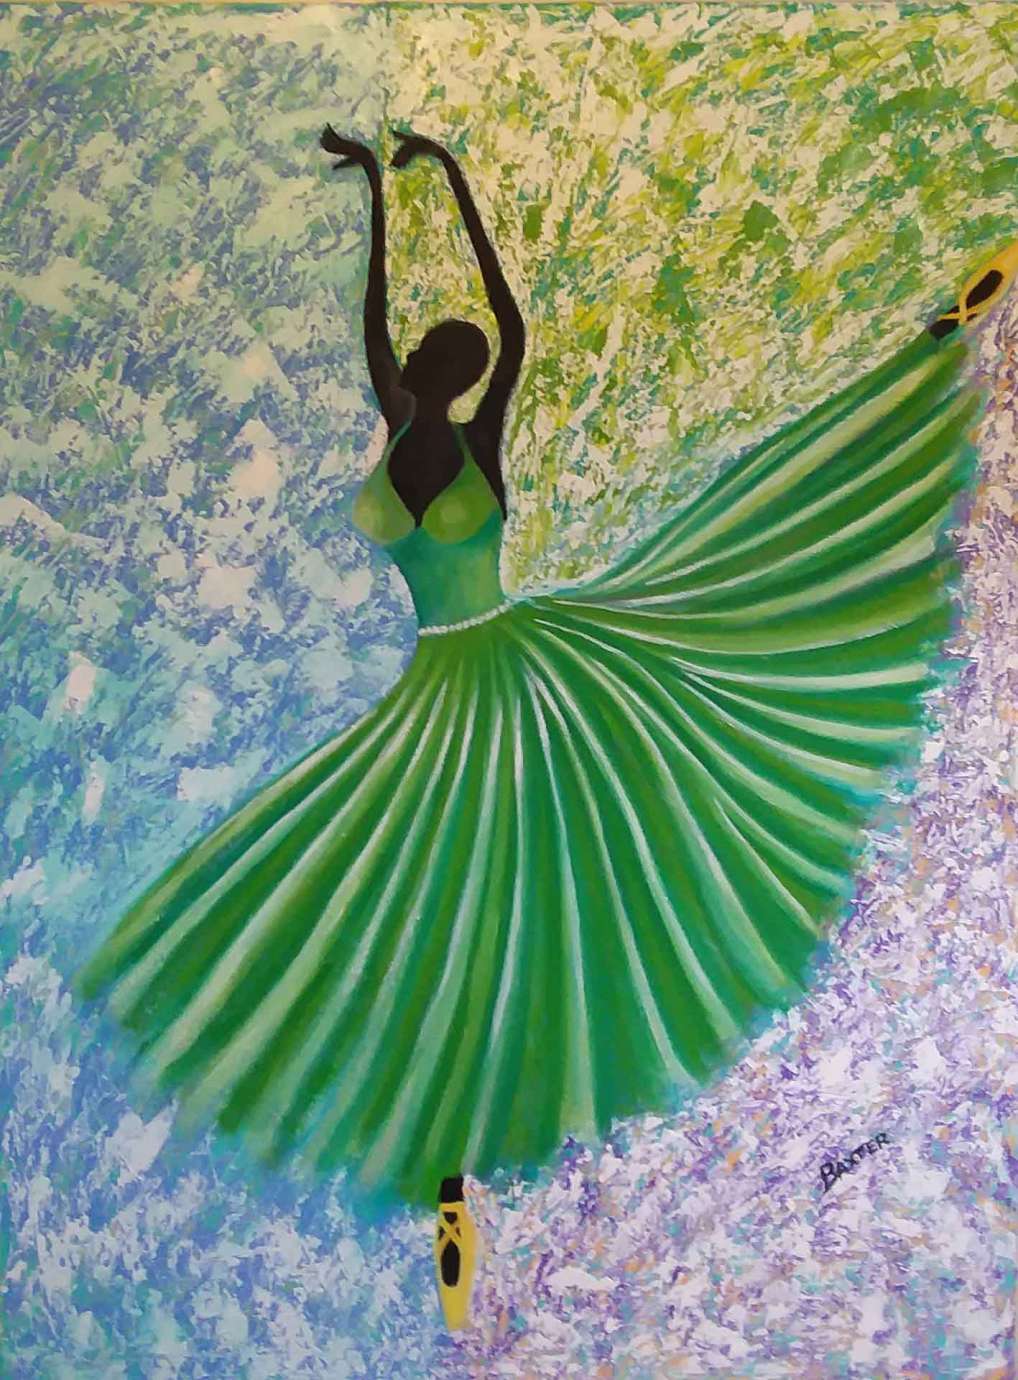 A painting by Edward Baxter of a dancer in a green dress with a blue, purple, and green background